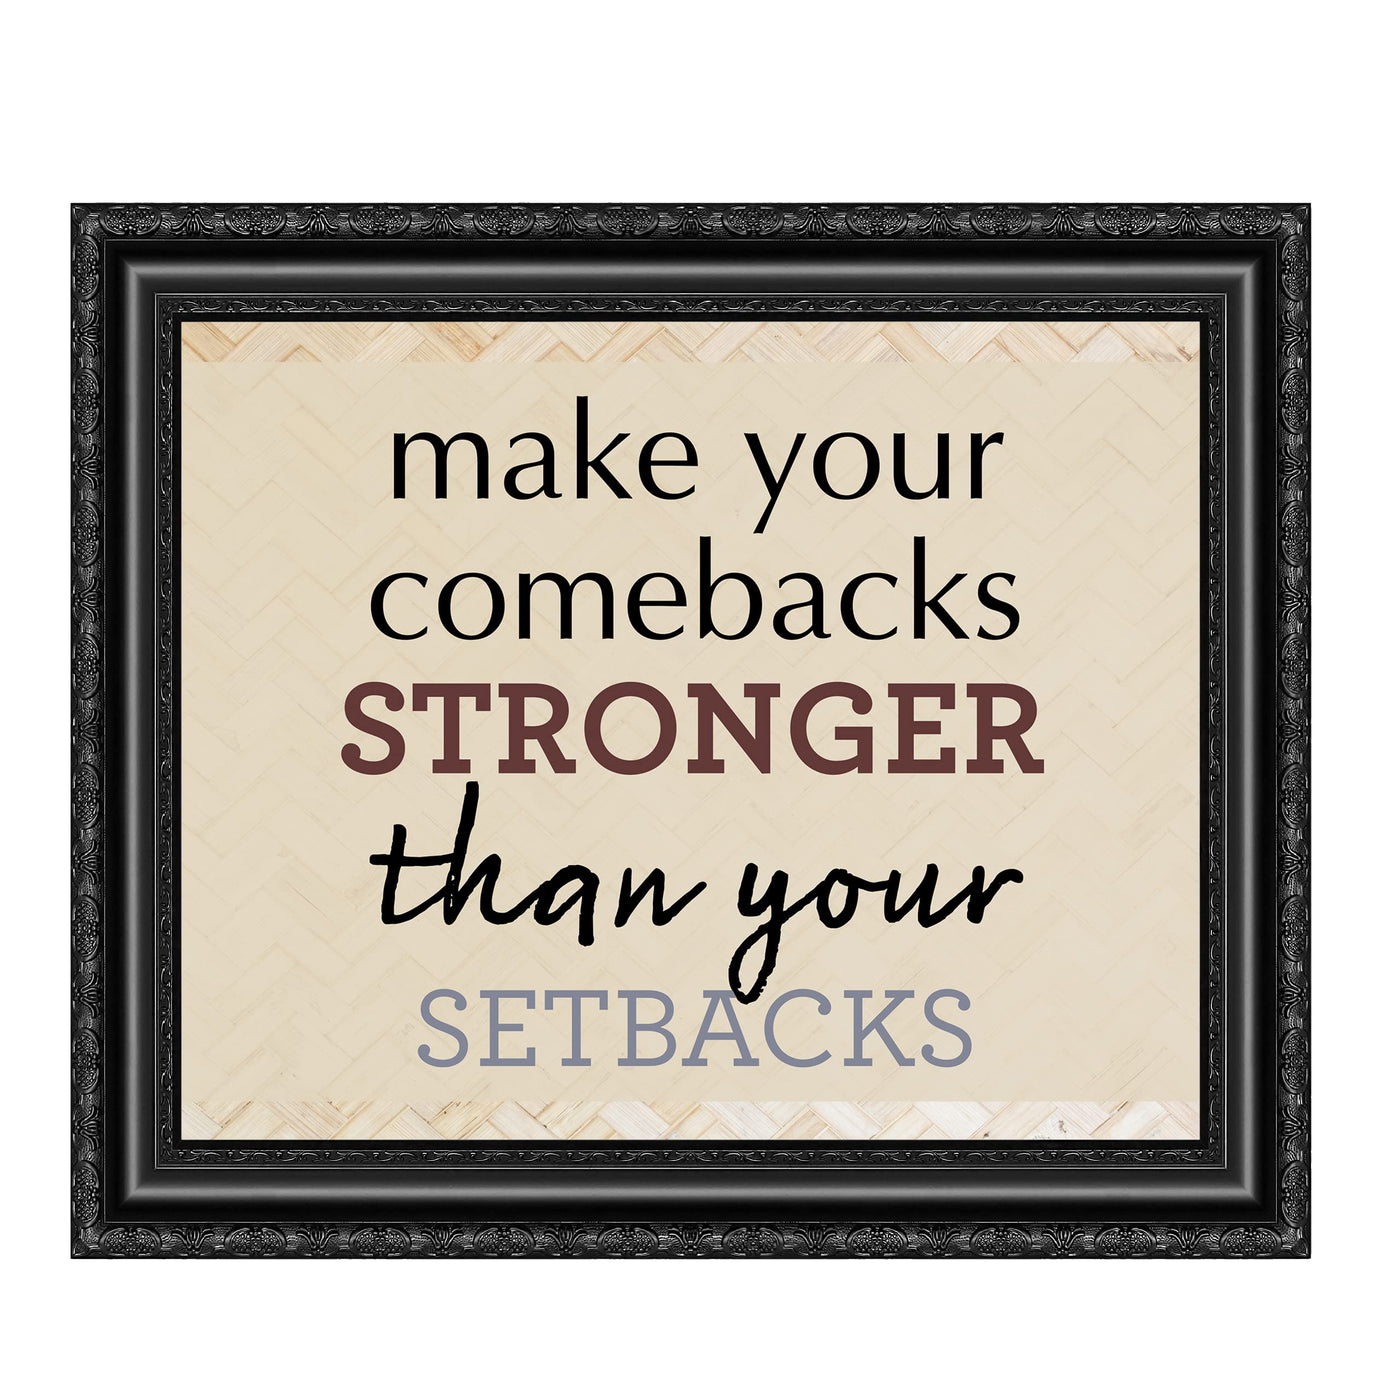 Make Your Comebacks Stronger Than Setbacks-Motivational Quotes Wall Art Print -10 x 8" Ready to Frame. Inspirational Home-Office-Classroom-Teen-Success Decor. Perfect Sign For Teachers & Graduates!